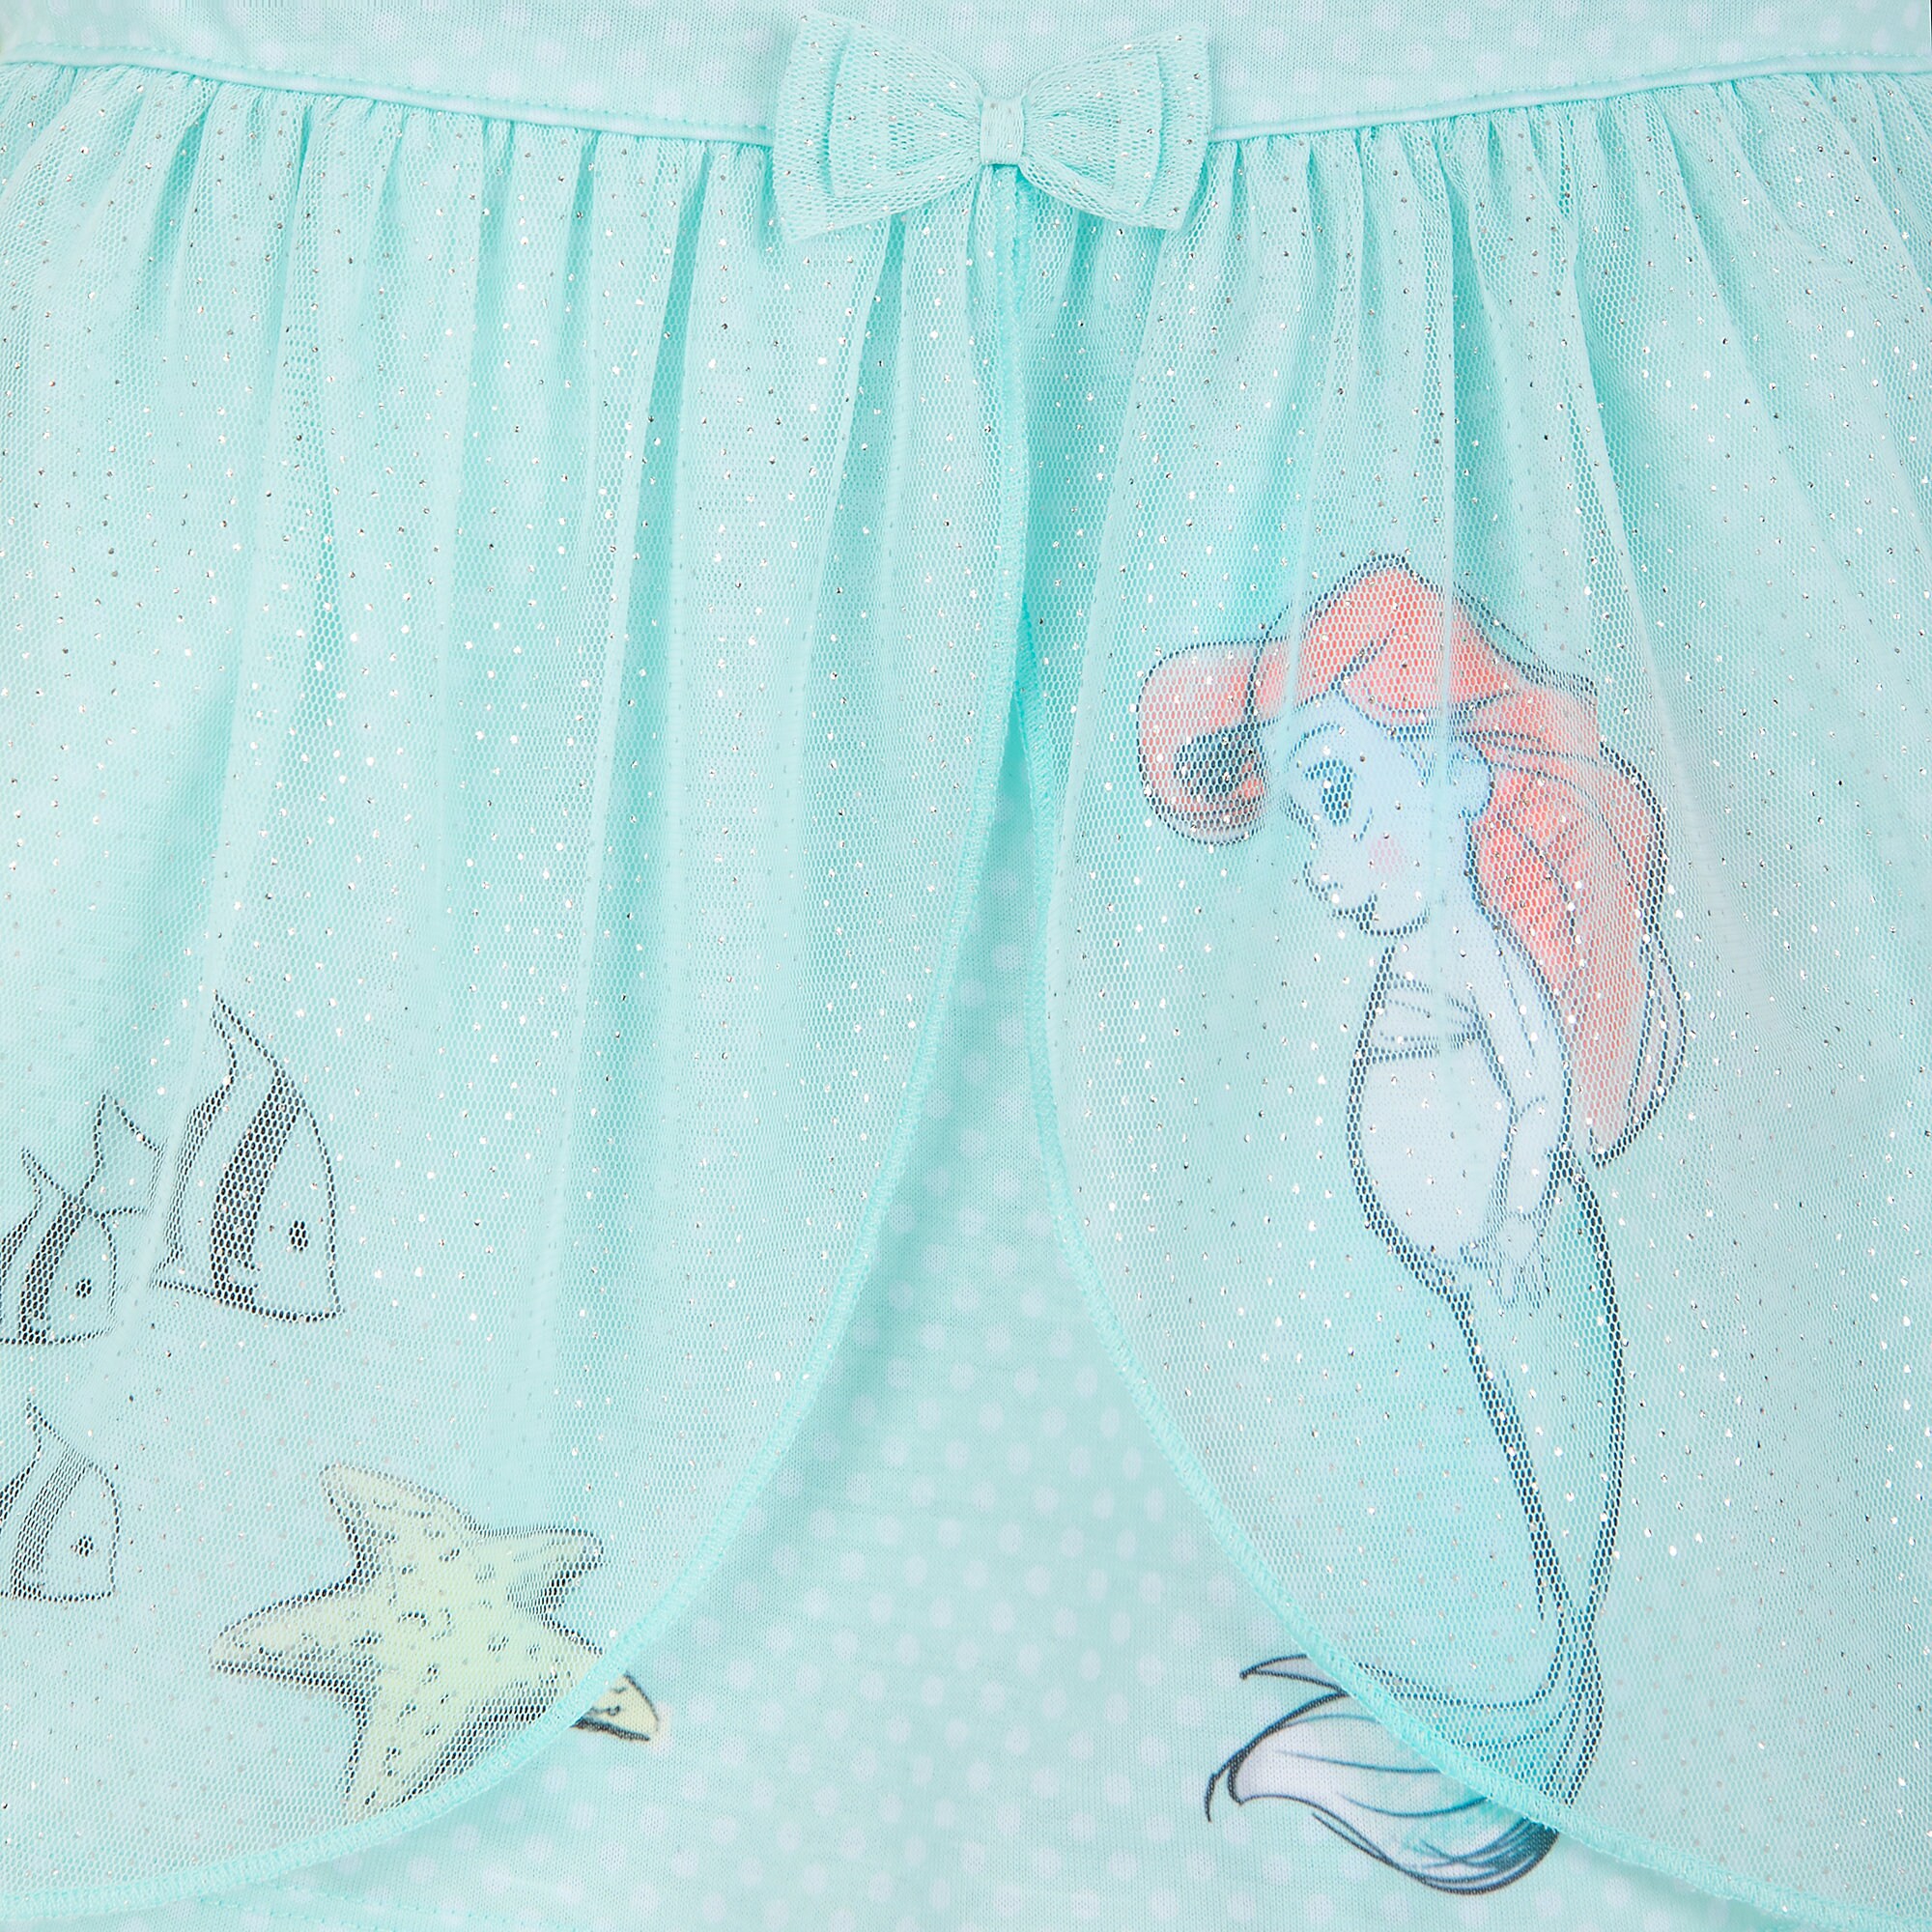 Disney Animators' Collection Ariel Matching Pajama Set for Kids and Doll